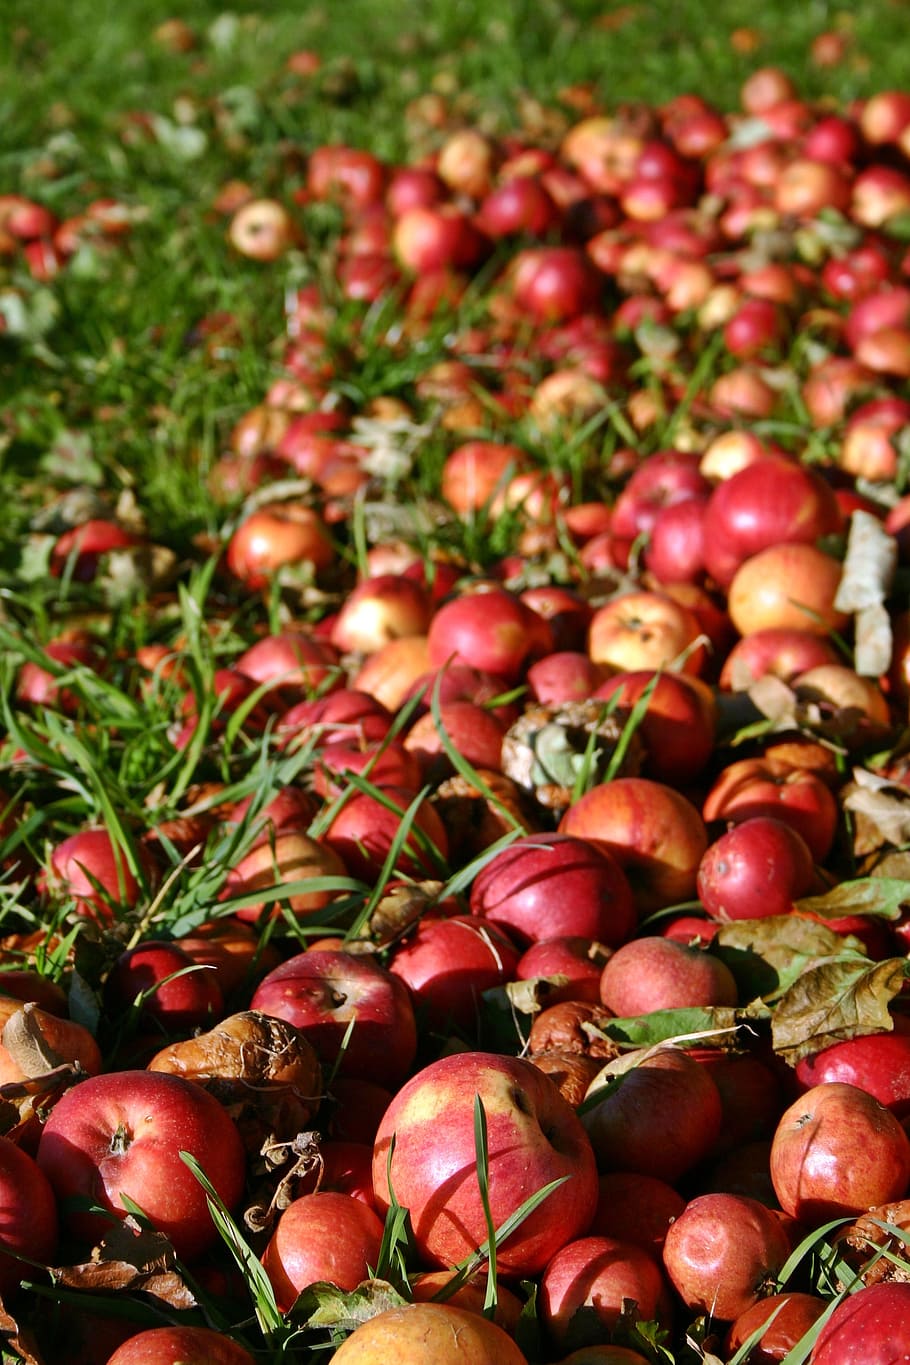 apple, red, windfall, autumn, red apple, fruit, late summer, ripe, meadow, grass